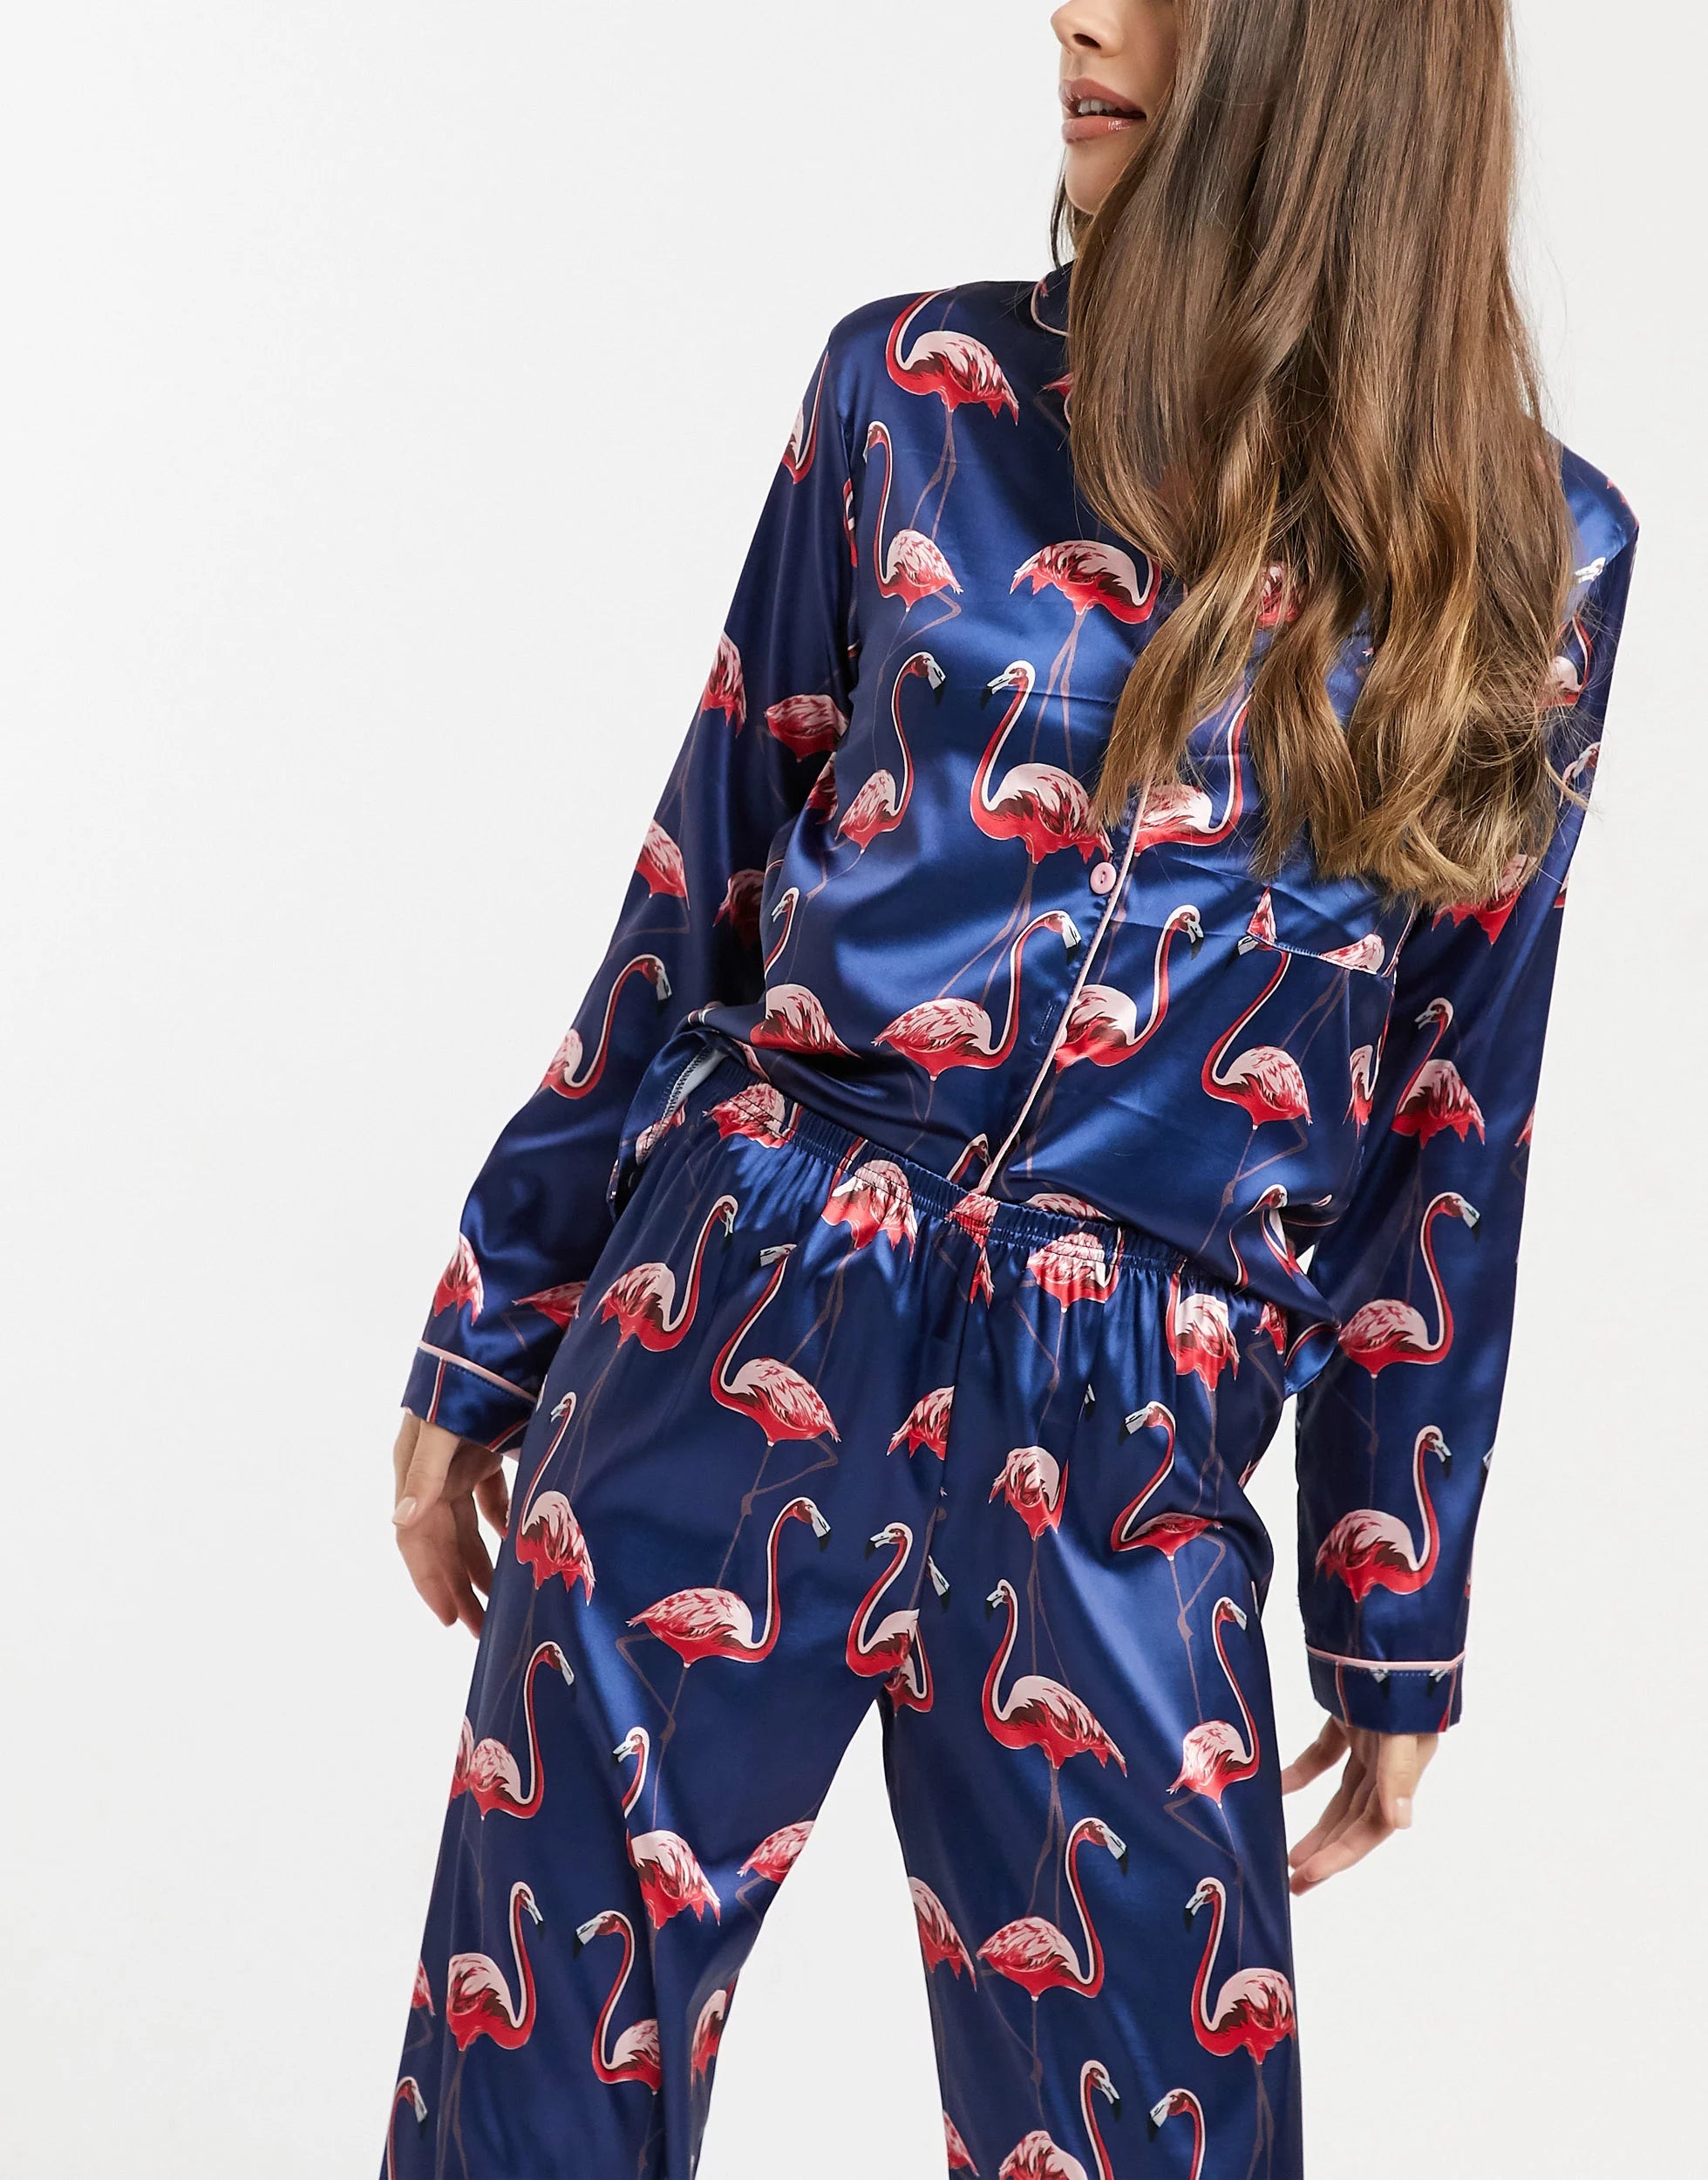 Navy Blue Color Digital Abstract Printed loungewear/Nightsuit For Women With Pants.